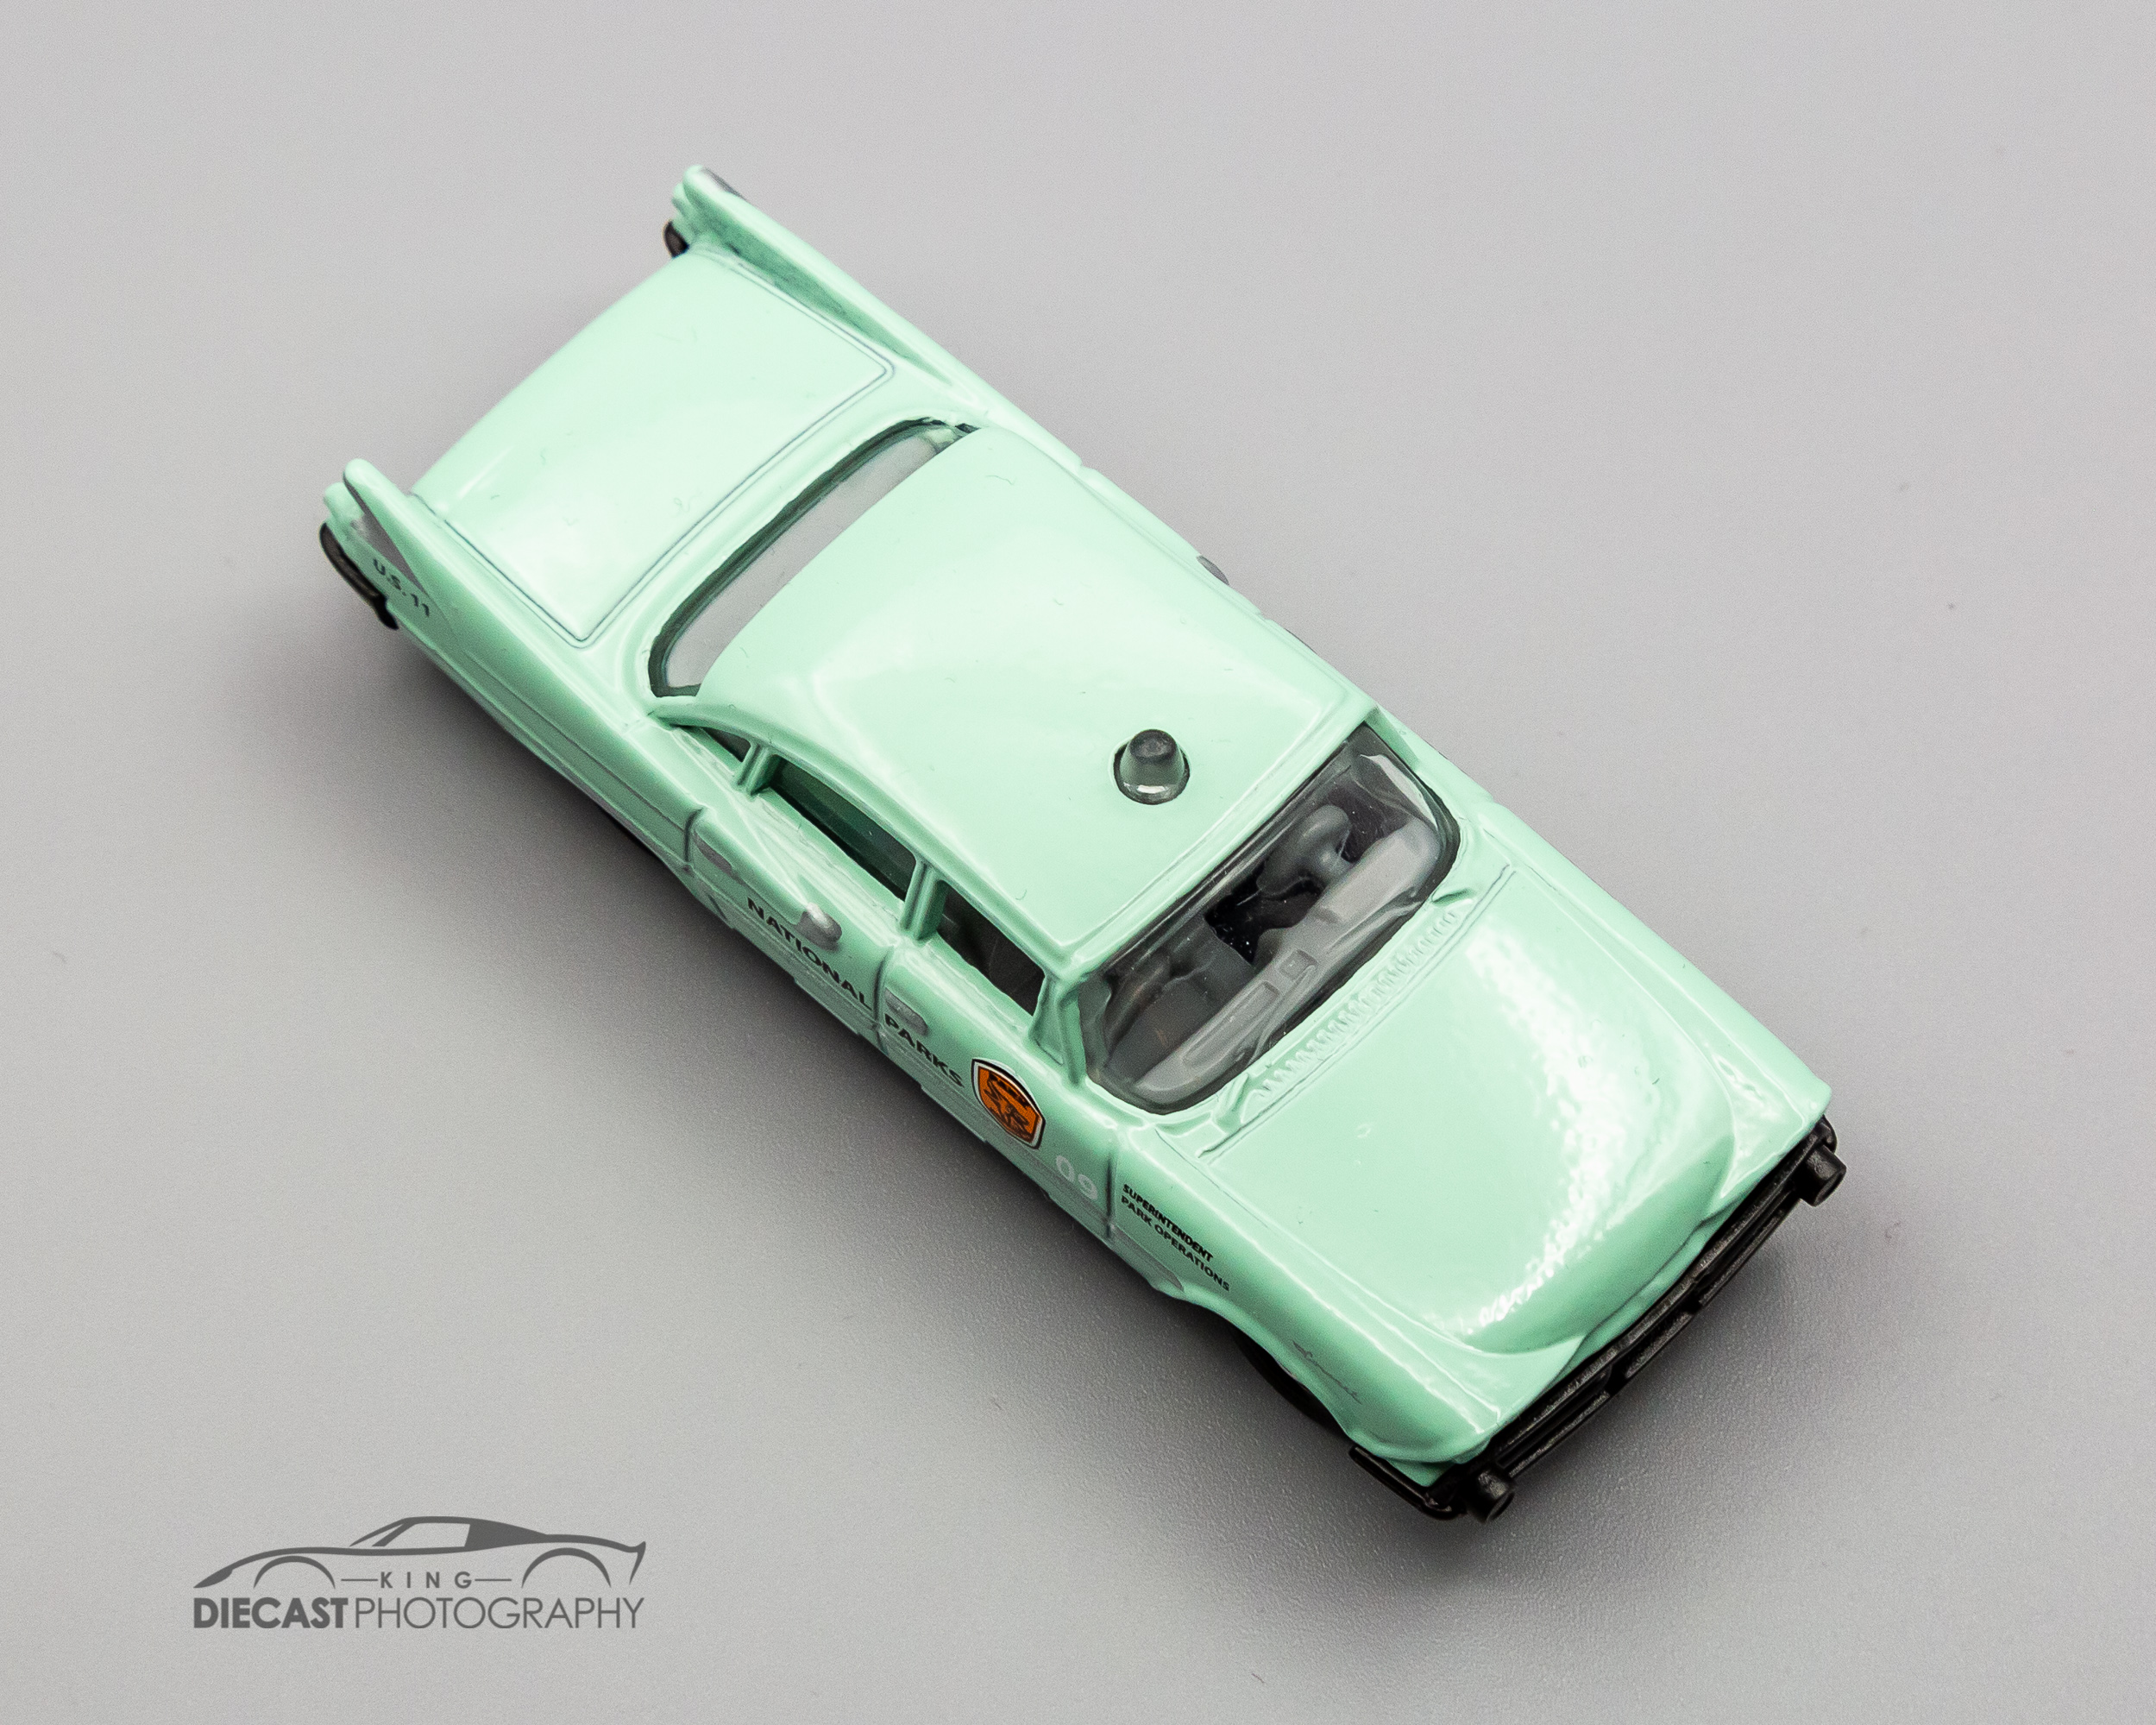 Details about   MATCHBOX 2020 MBX COUNTRYSIDE '59 DODGE CORONET POLICE CAR #94/100 